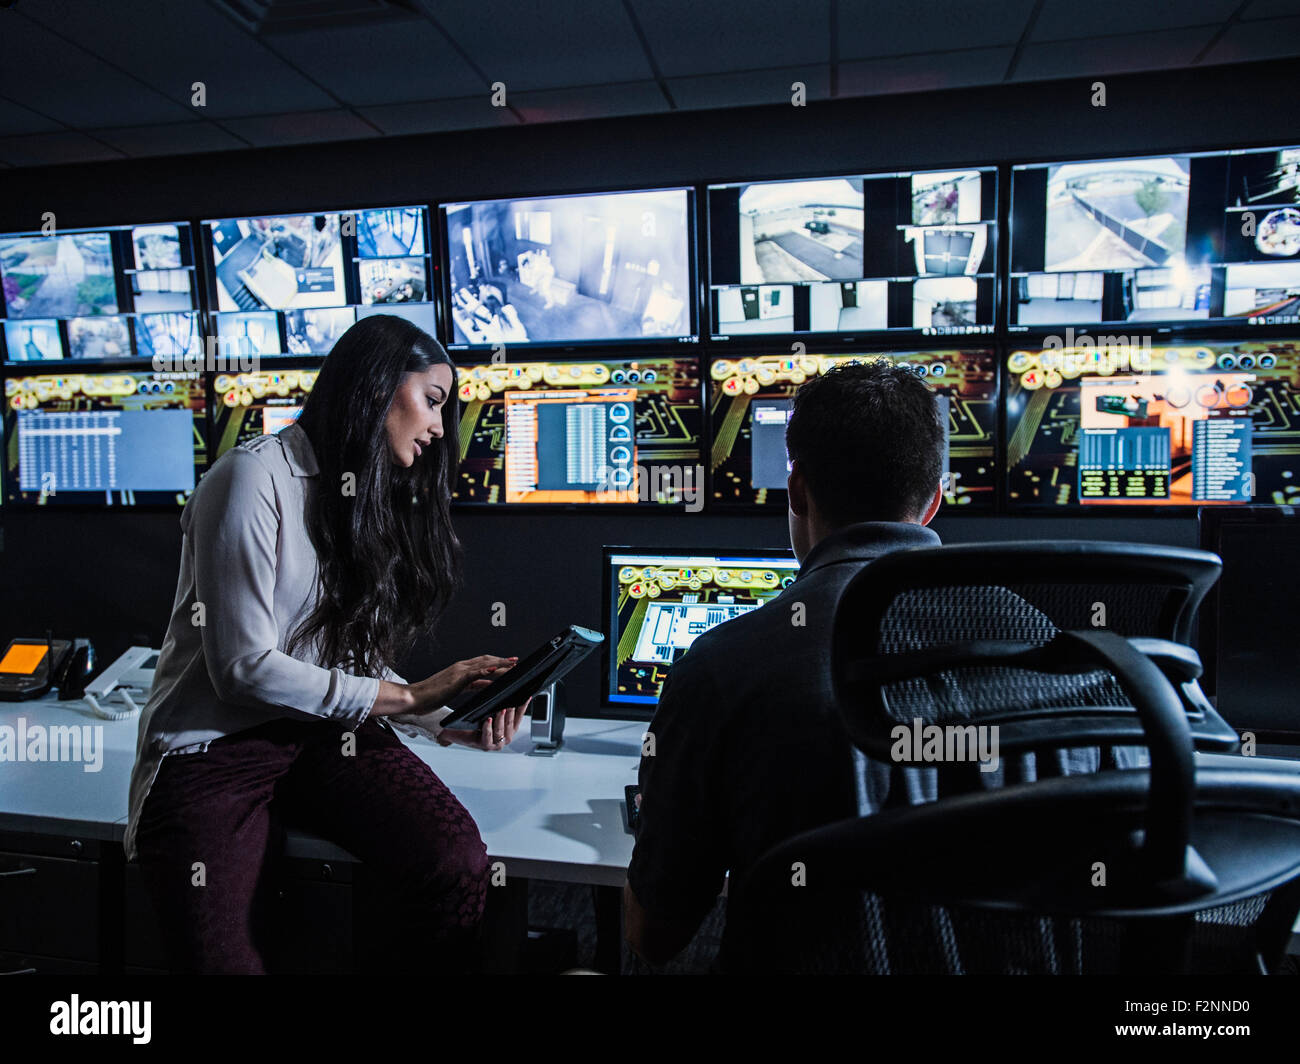 Security guards watching monitors in control room Stock Photo